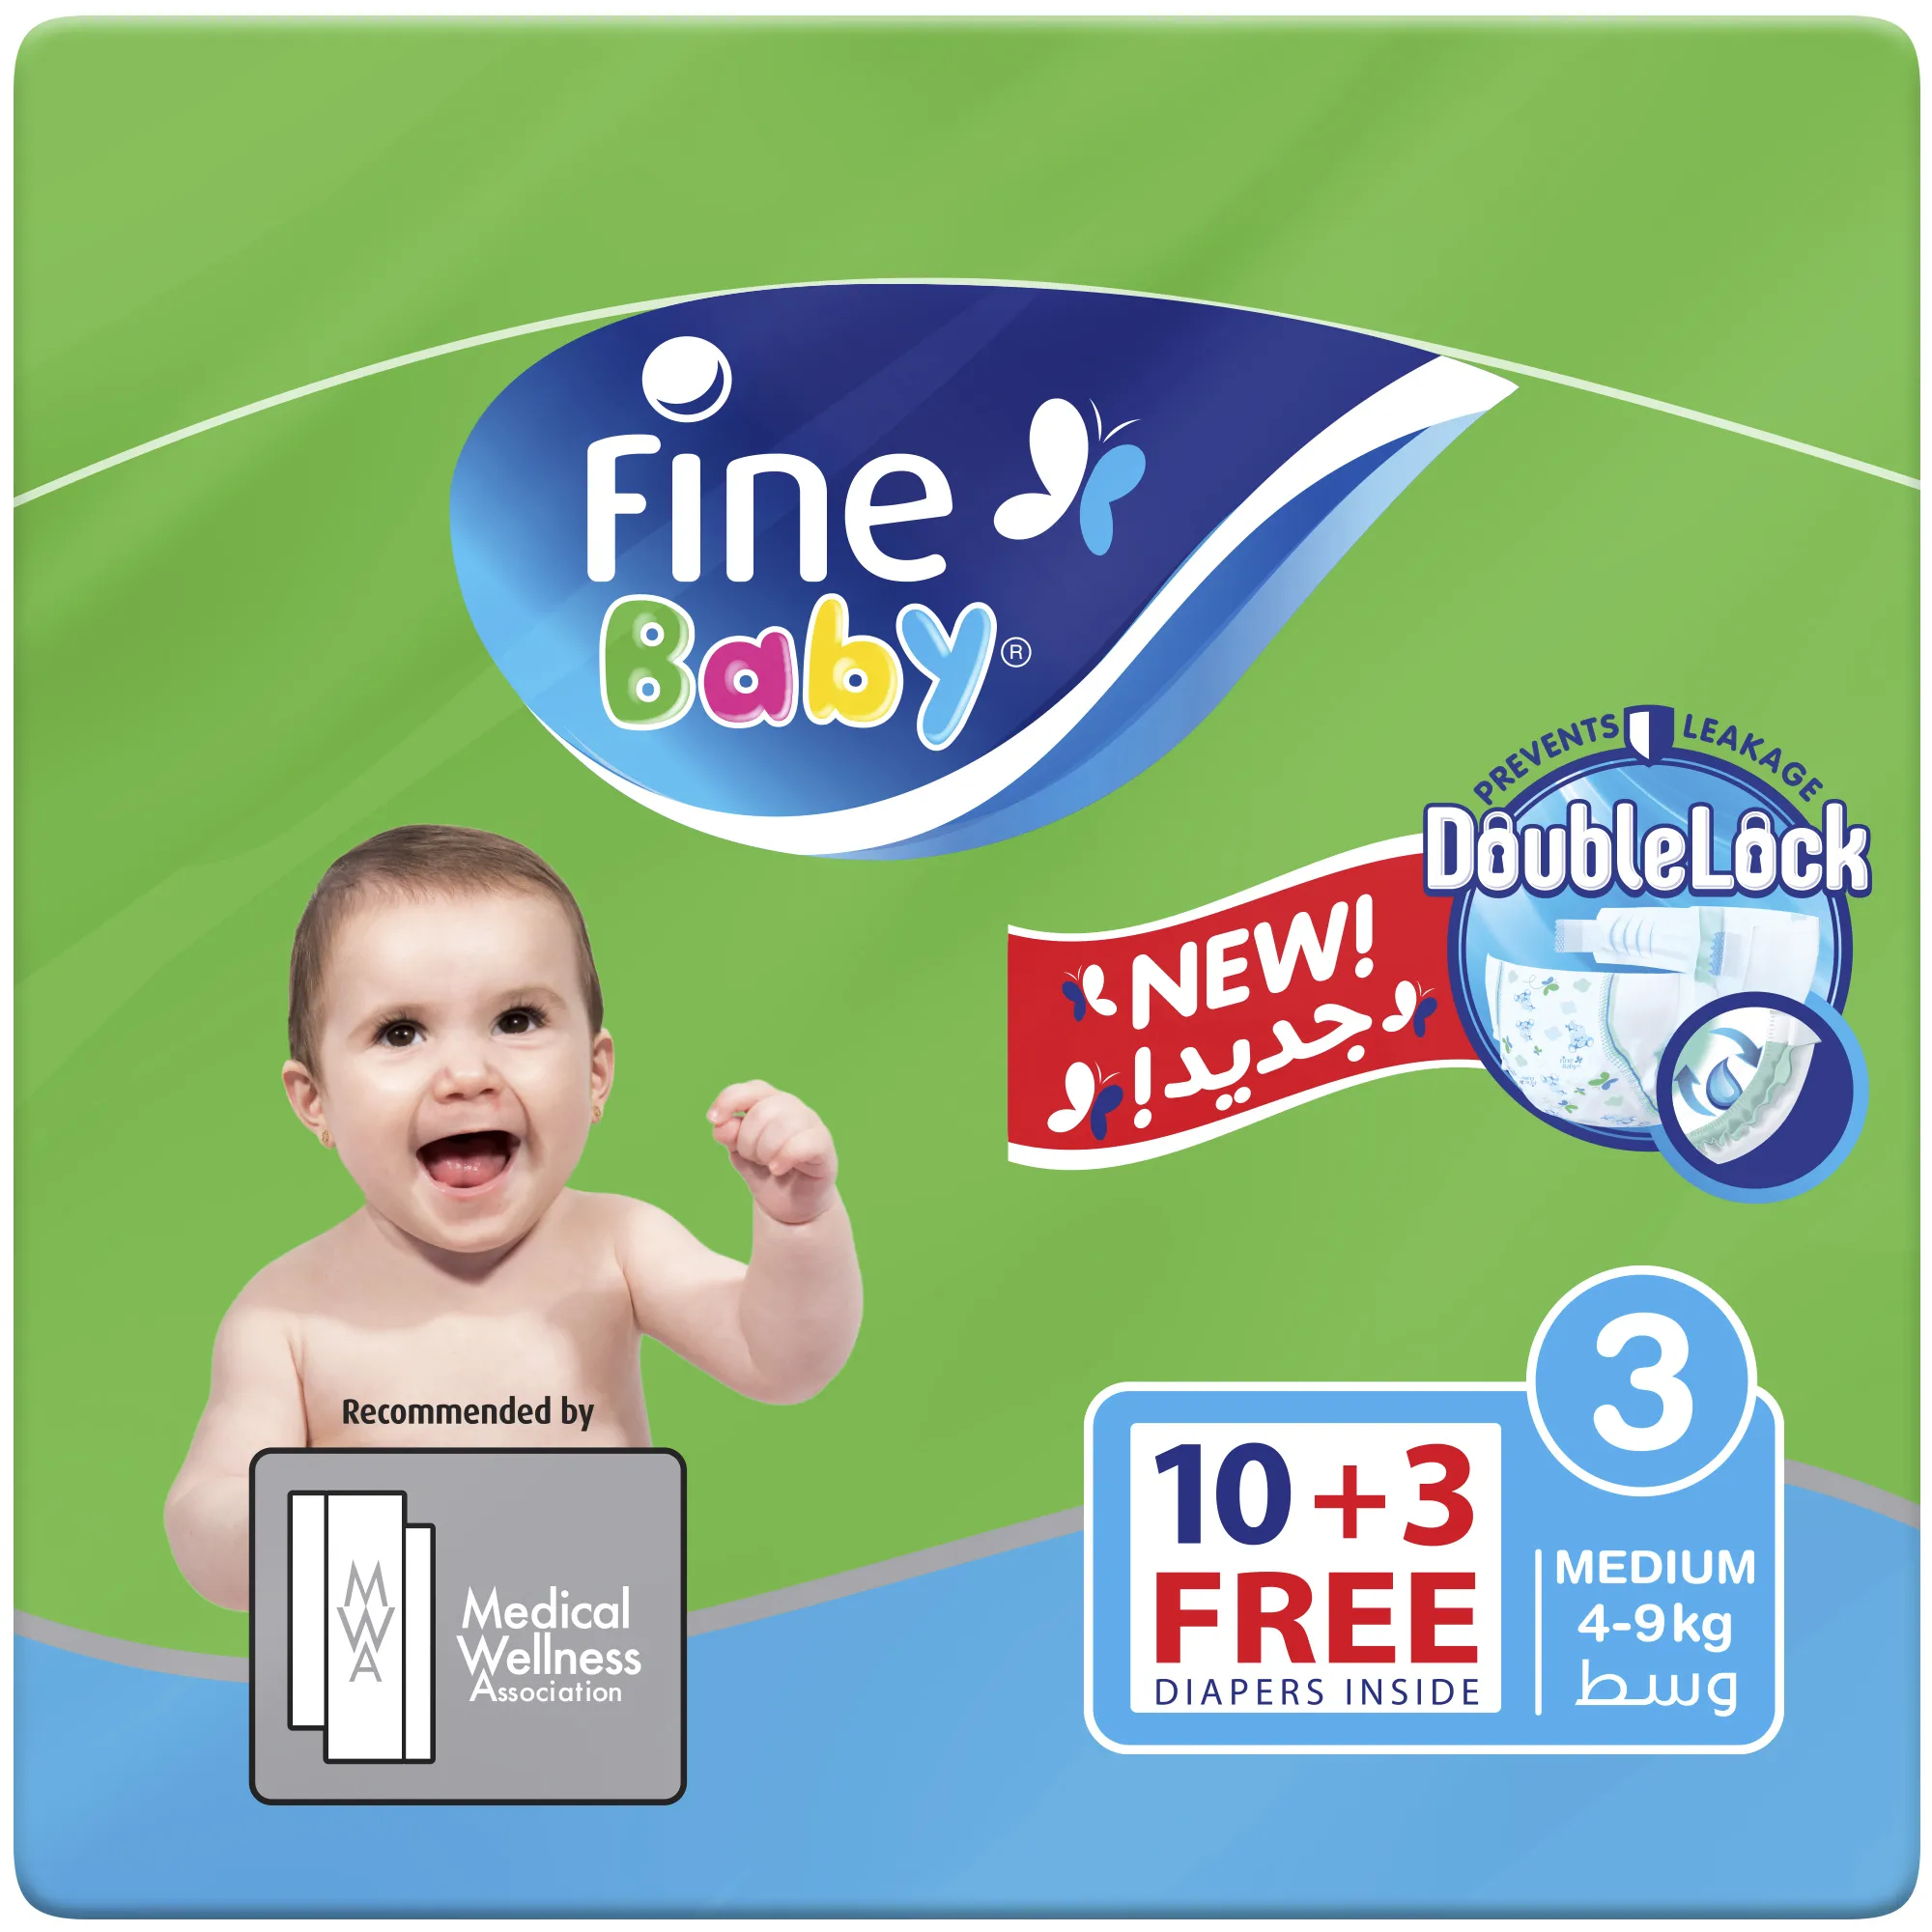 Fine Baby Diapers, DoubleLock Technology, Size 3, Medium 4-9kg, Travel Pack, 13 Diapers